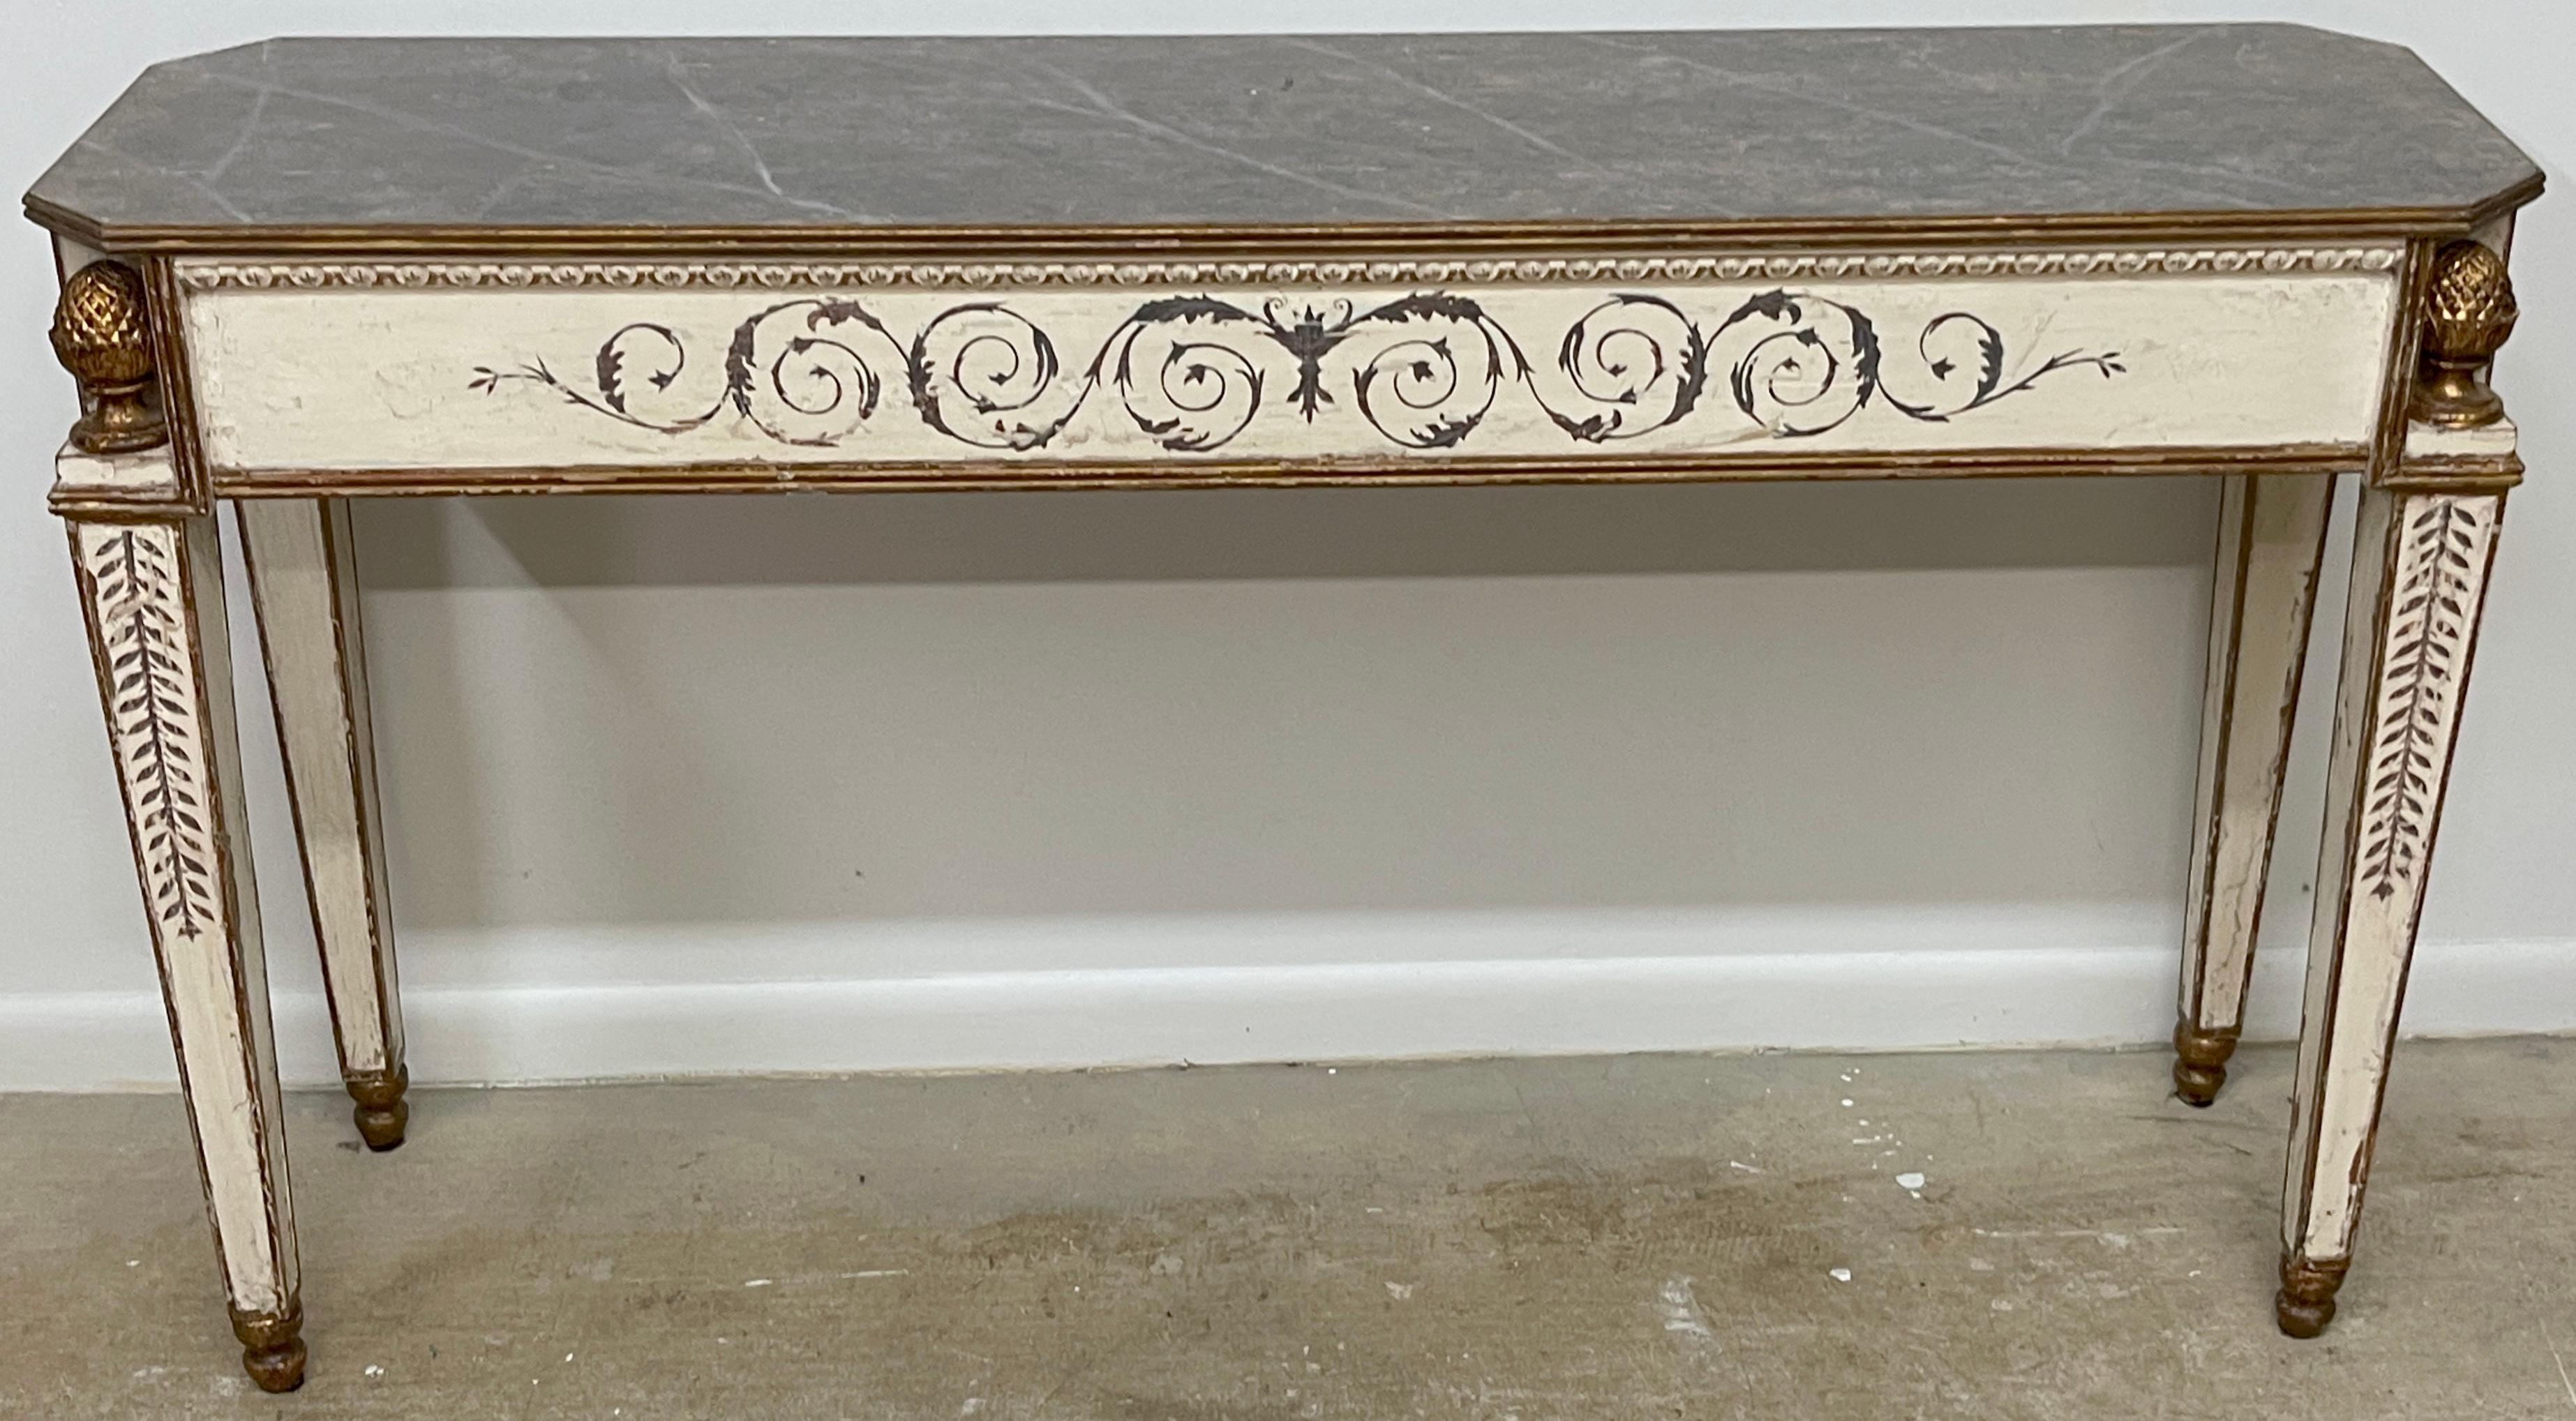 Polychromed Fine Italian Painted & Gilt Neoclassical Console Table 